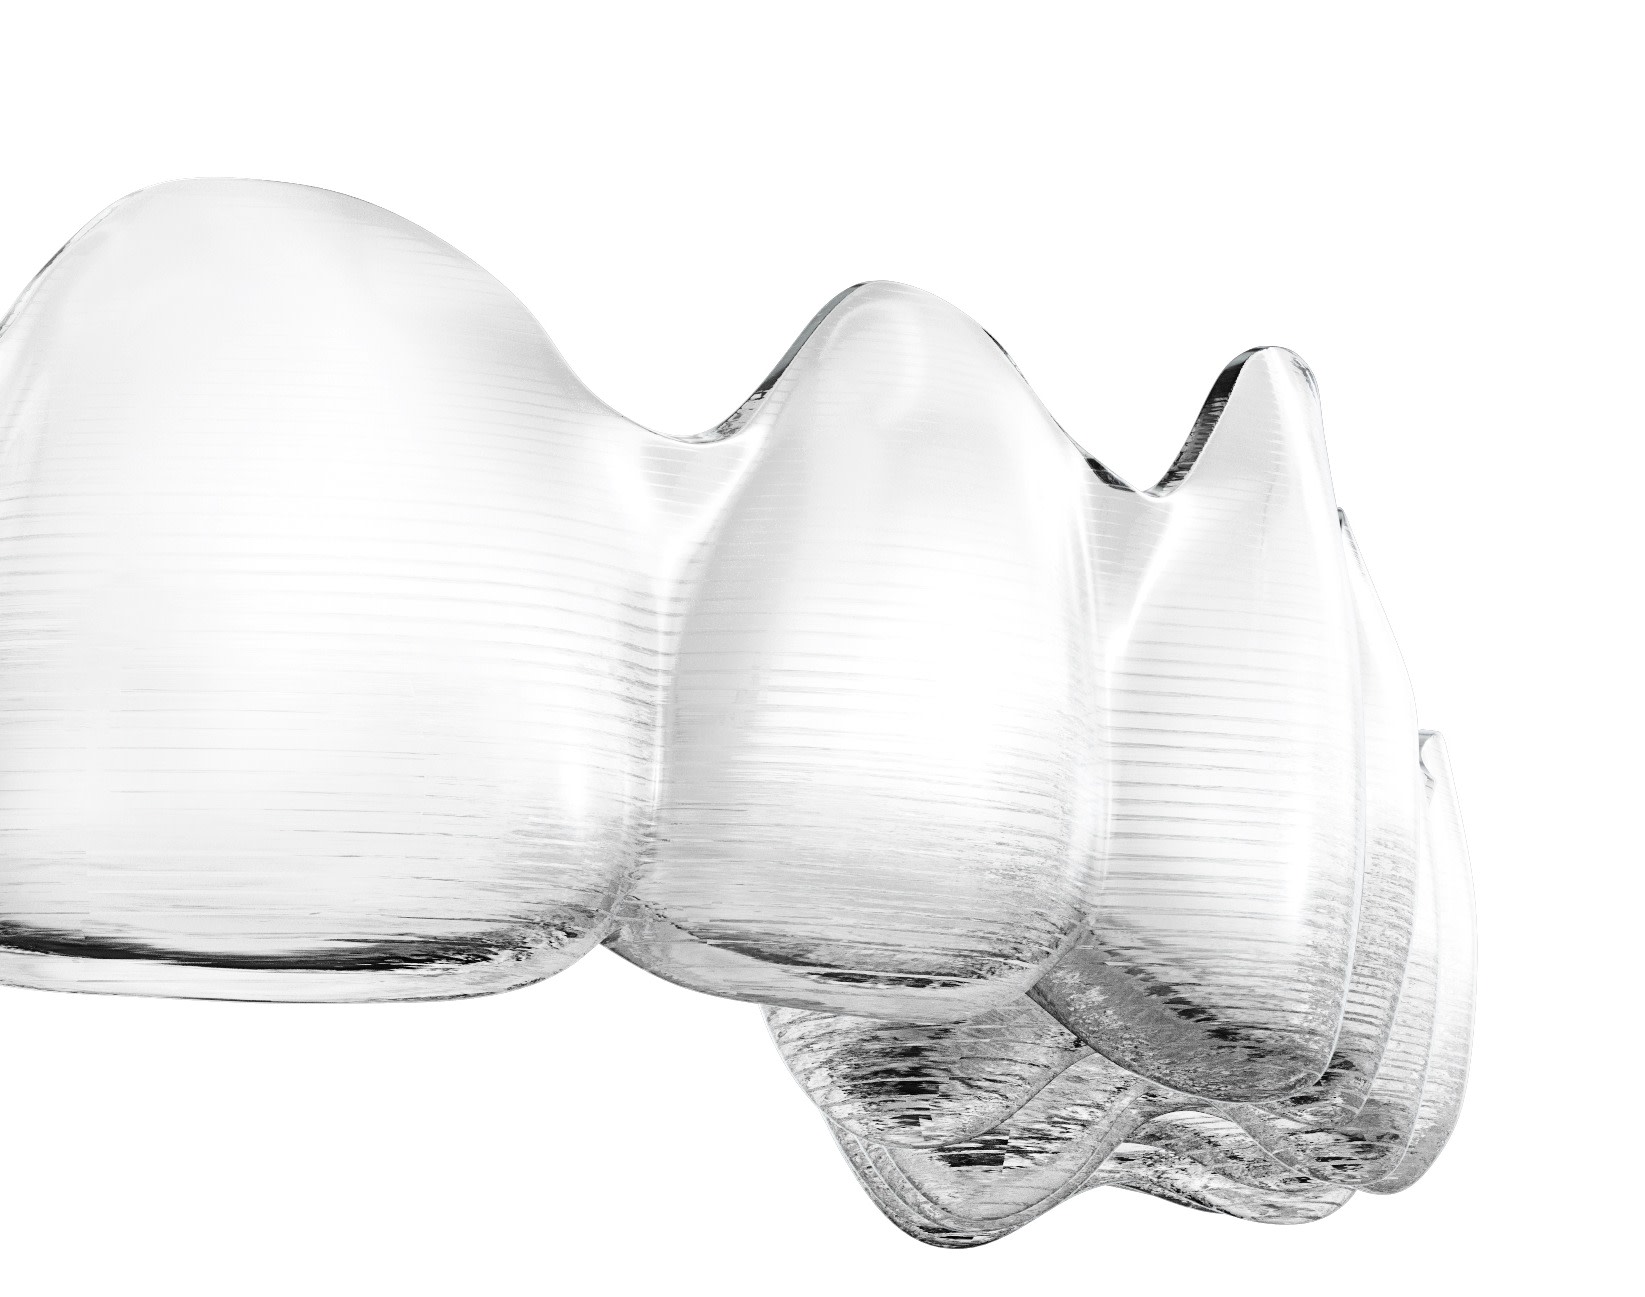 Invisalign Clear Aligners with Smart Track Technology